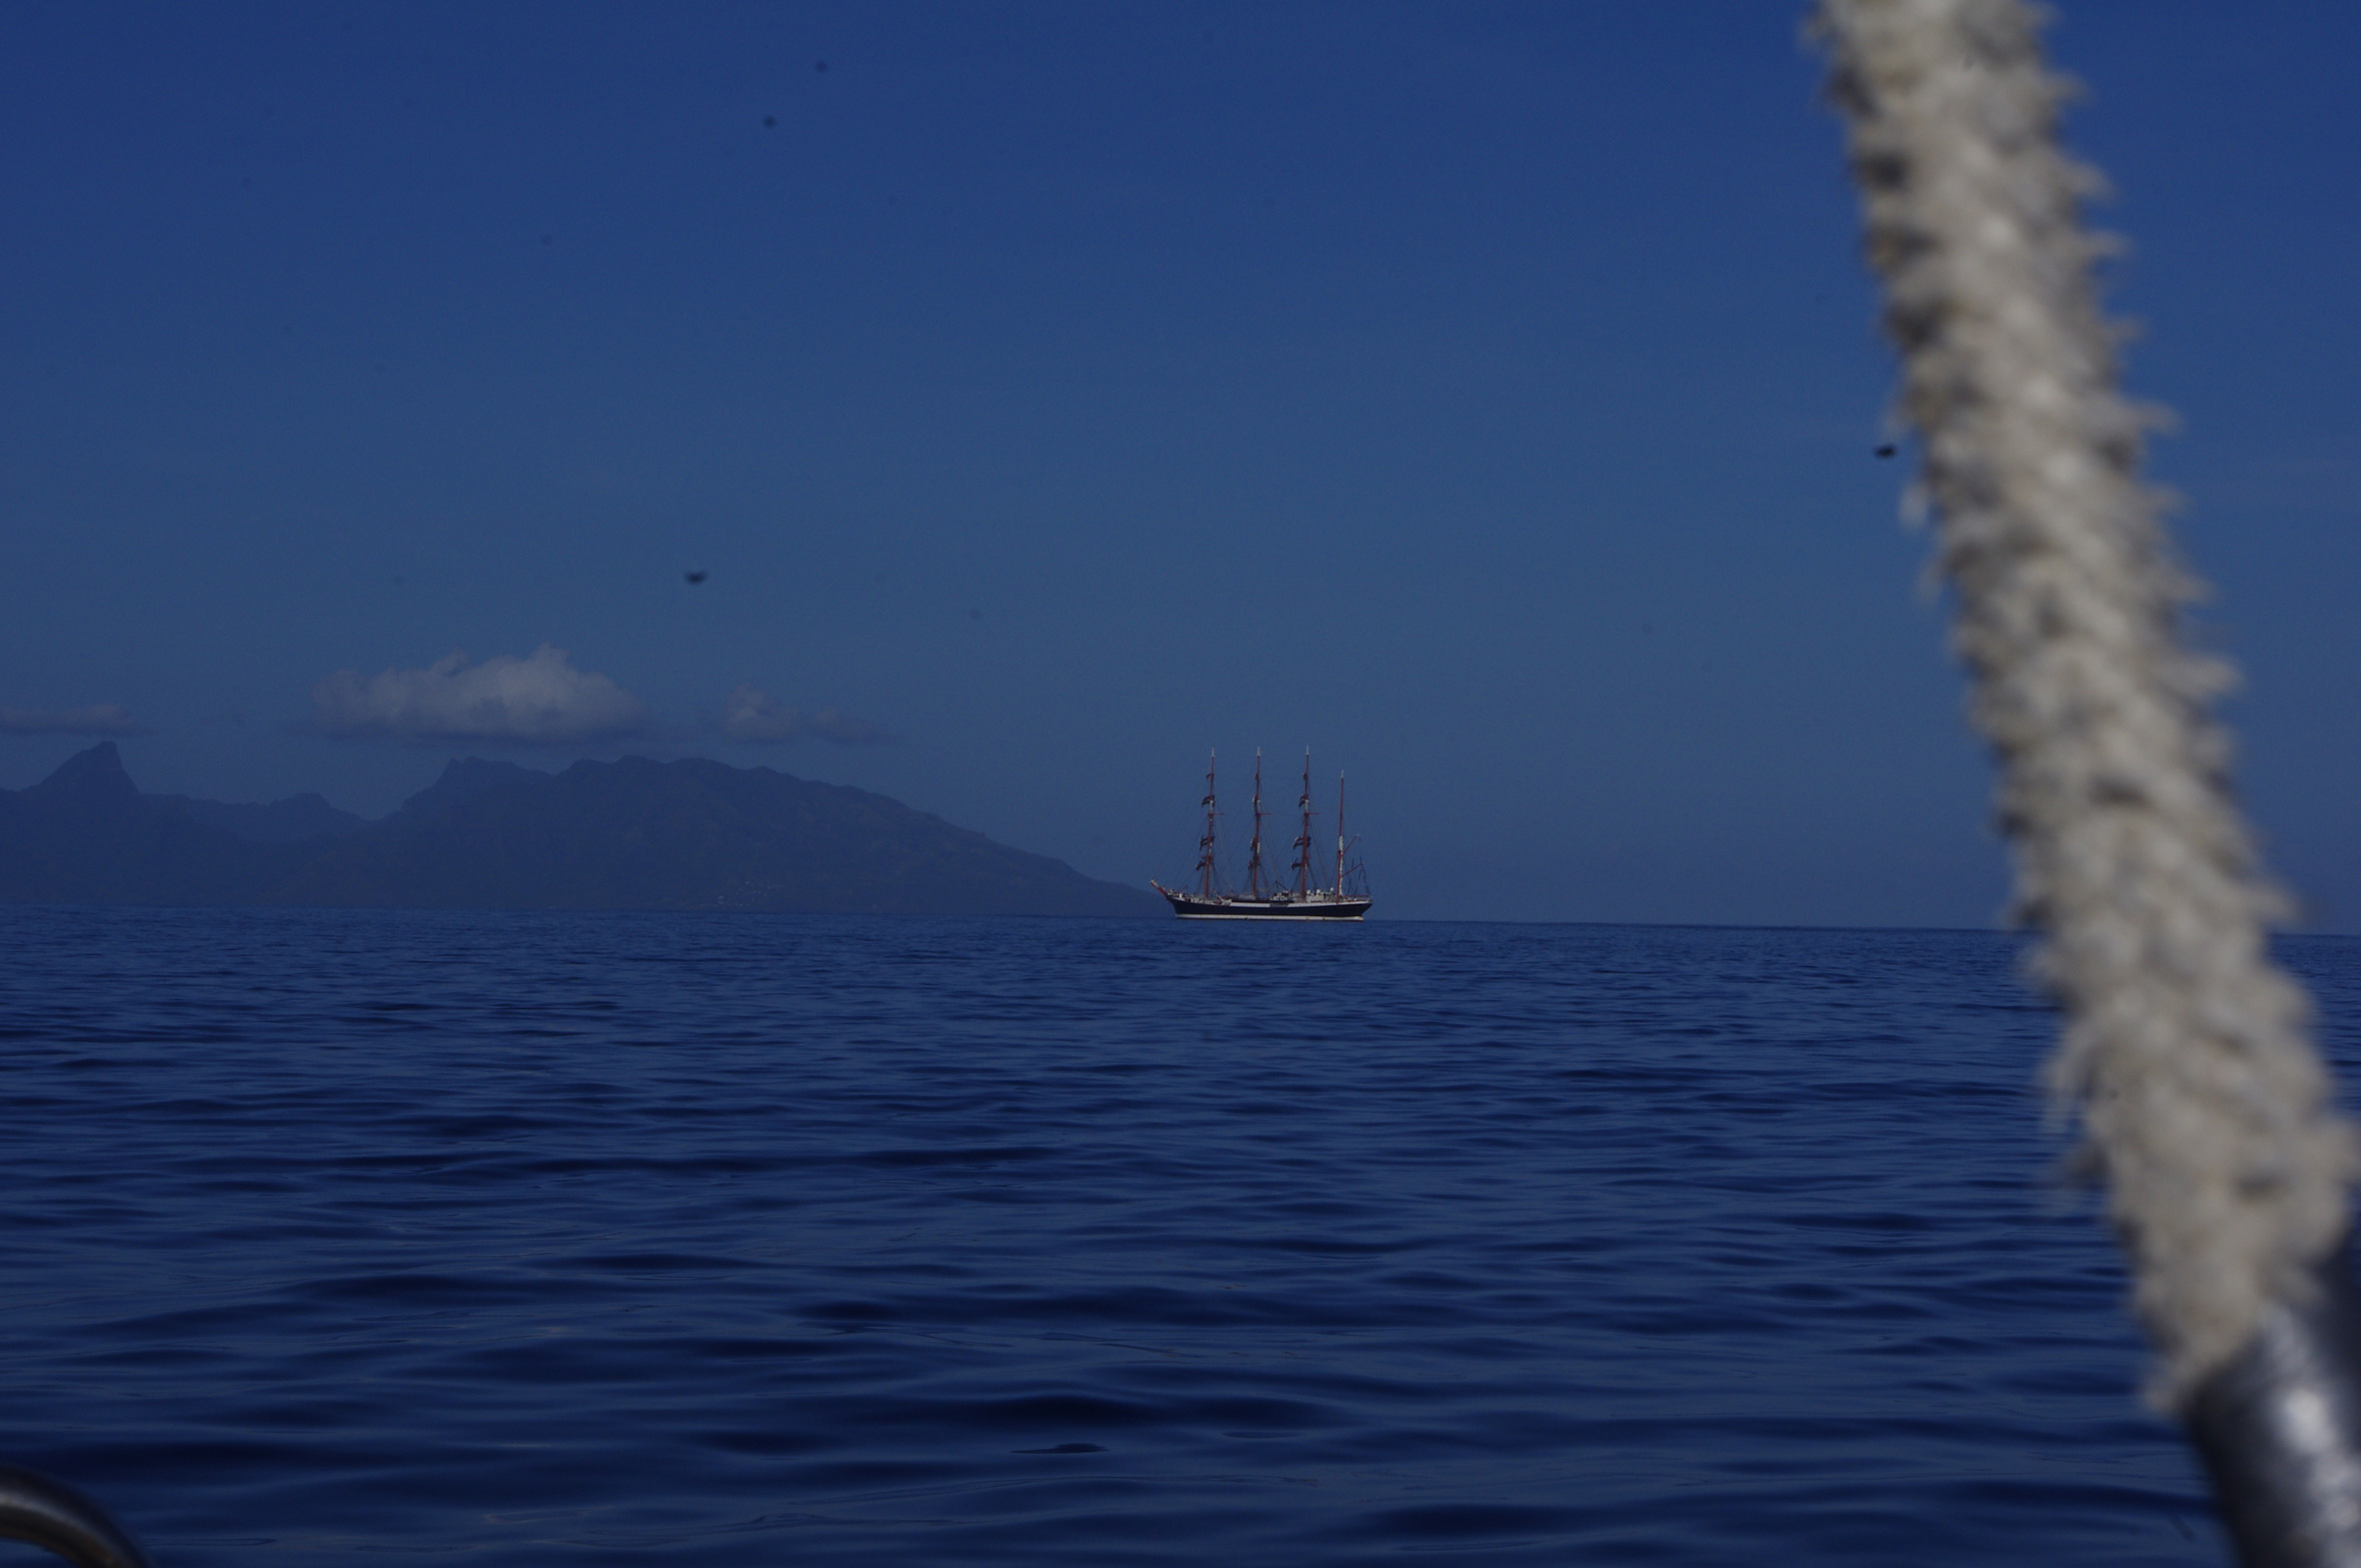 Solemn Meeting of Yacht DELTA and Barque SEDOV in Tahiti